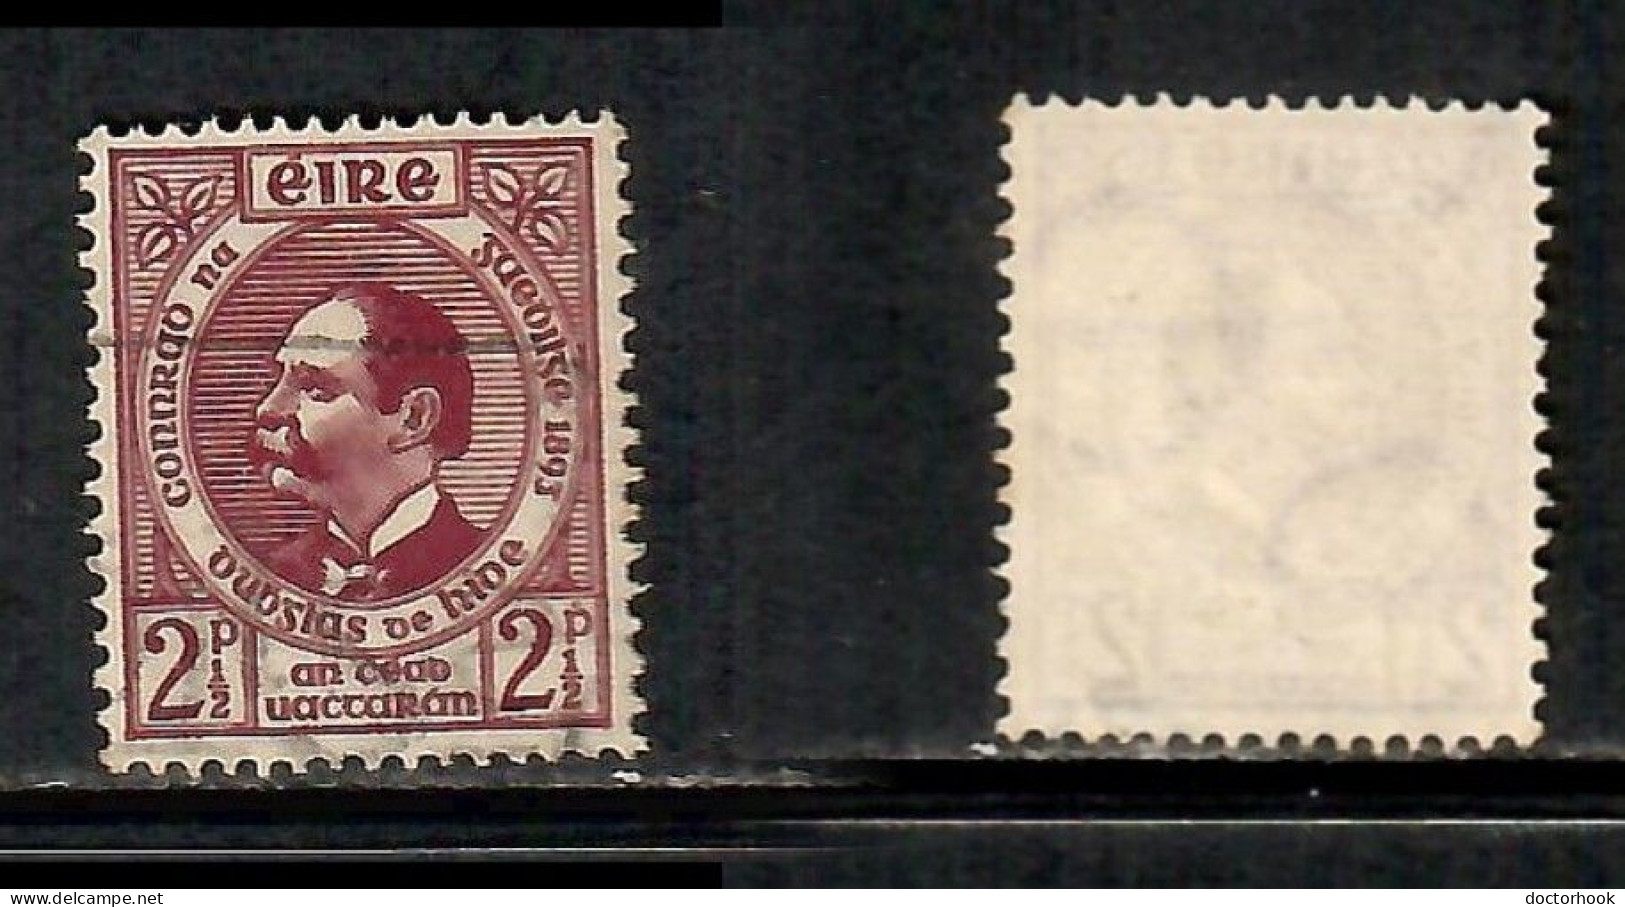 IRELAND    Scott # 125 USED (CONDITION PER SCAN) (Stamp Scan # 1035-10) - Used Stamps